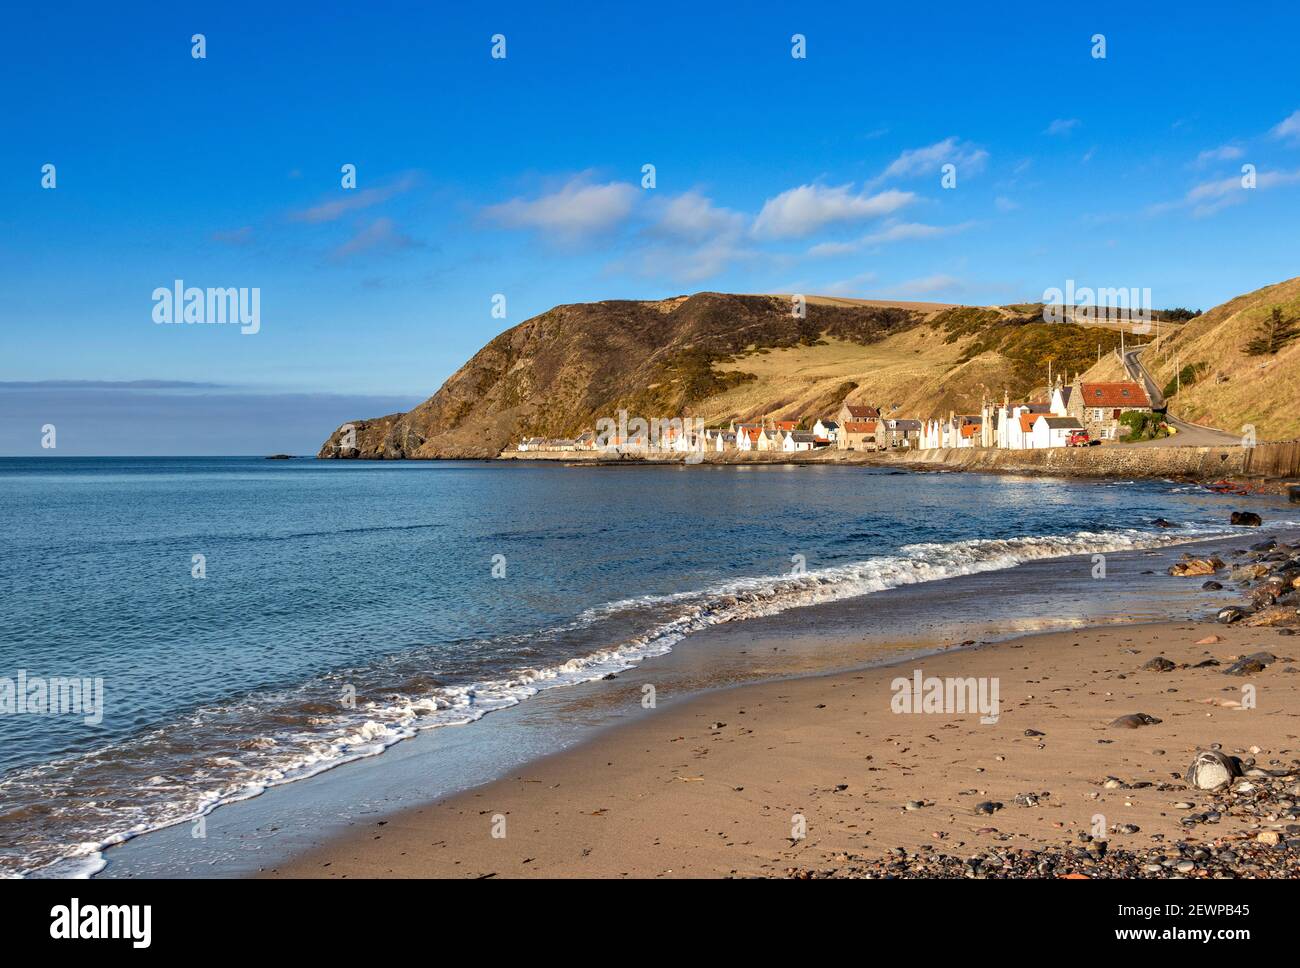 CROVIE VILLAGE ABERDEENSHIRE SCOTLAND A ROW OF HOUSES WITH RED ROOF TILES A BLUE SKY AND A WAVE BREAKING OVER A SMALL SANDY BEACH Stock Photo